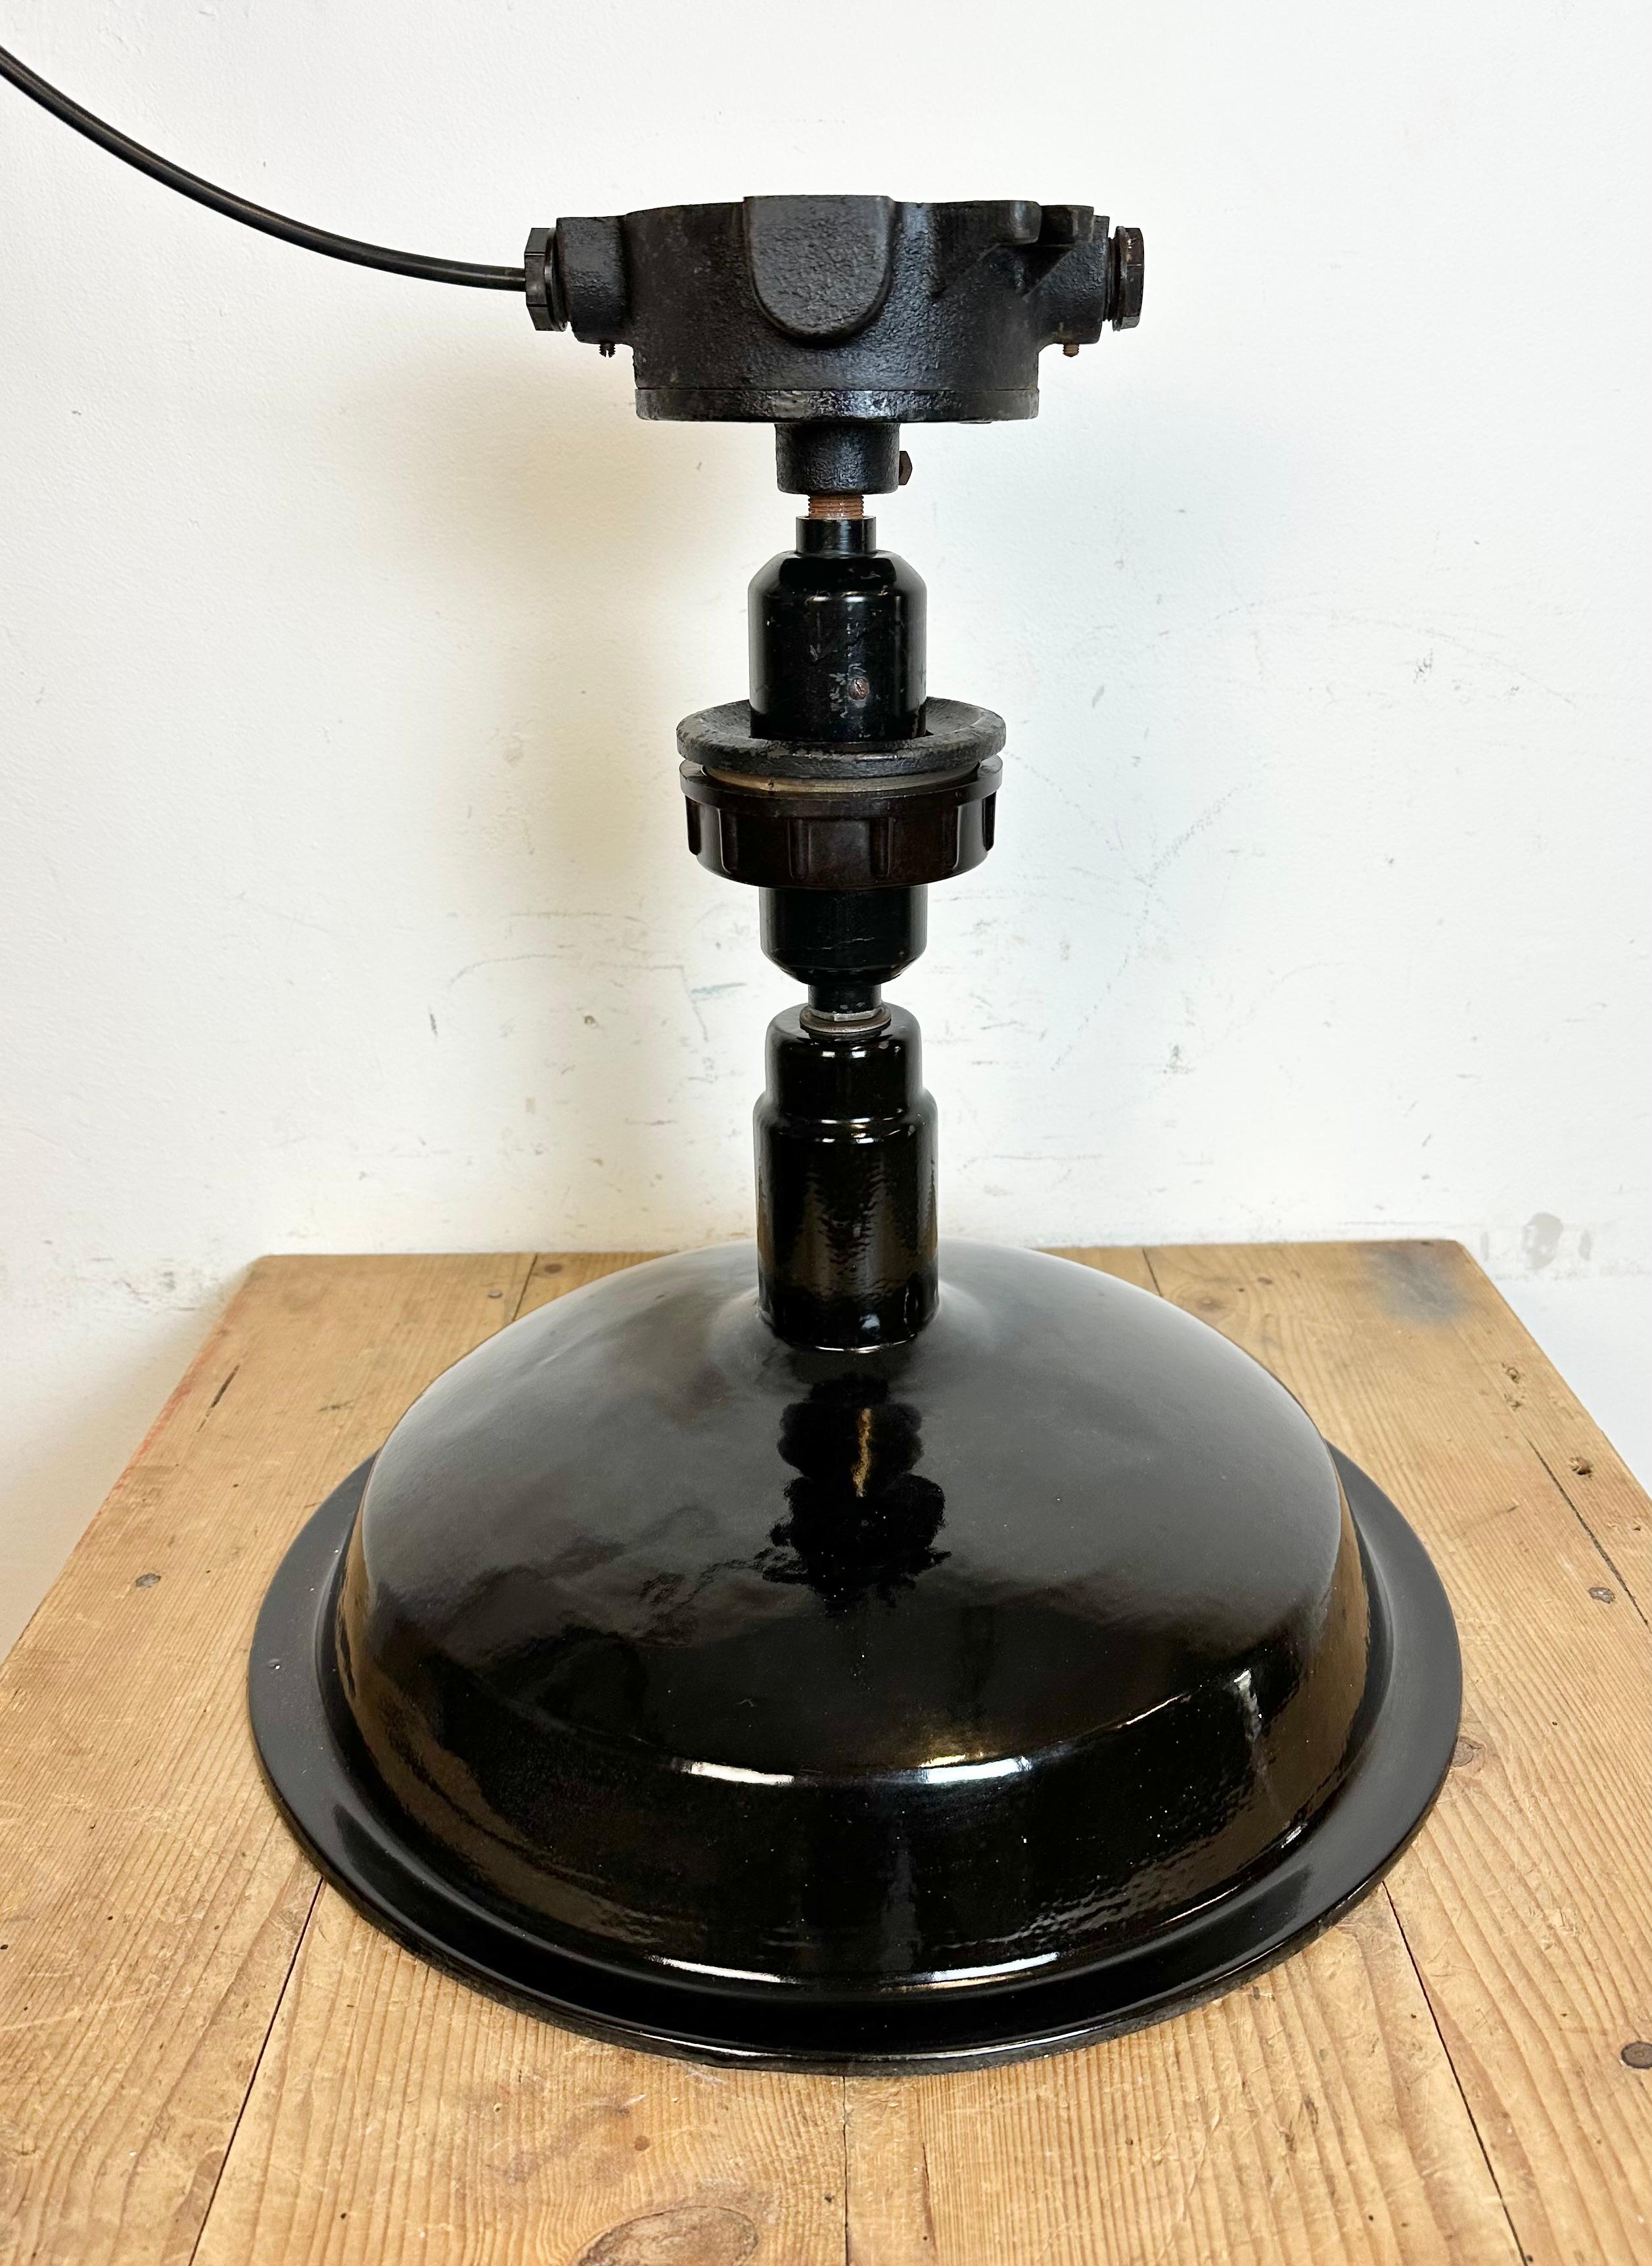 Vintage industrial enamel ceiling lamp made by Elektrosvit in former Czechoslovakia during the 1950s. It features a black enamel shade with white enamel interior and cast iron ceiling mounting. New porcelain socket requires standard E 27/ E 26 light